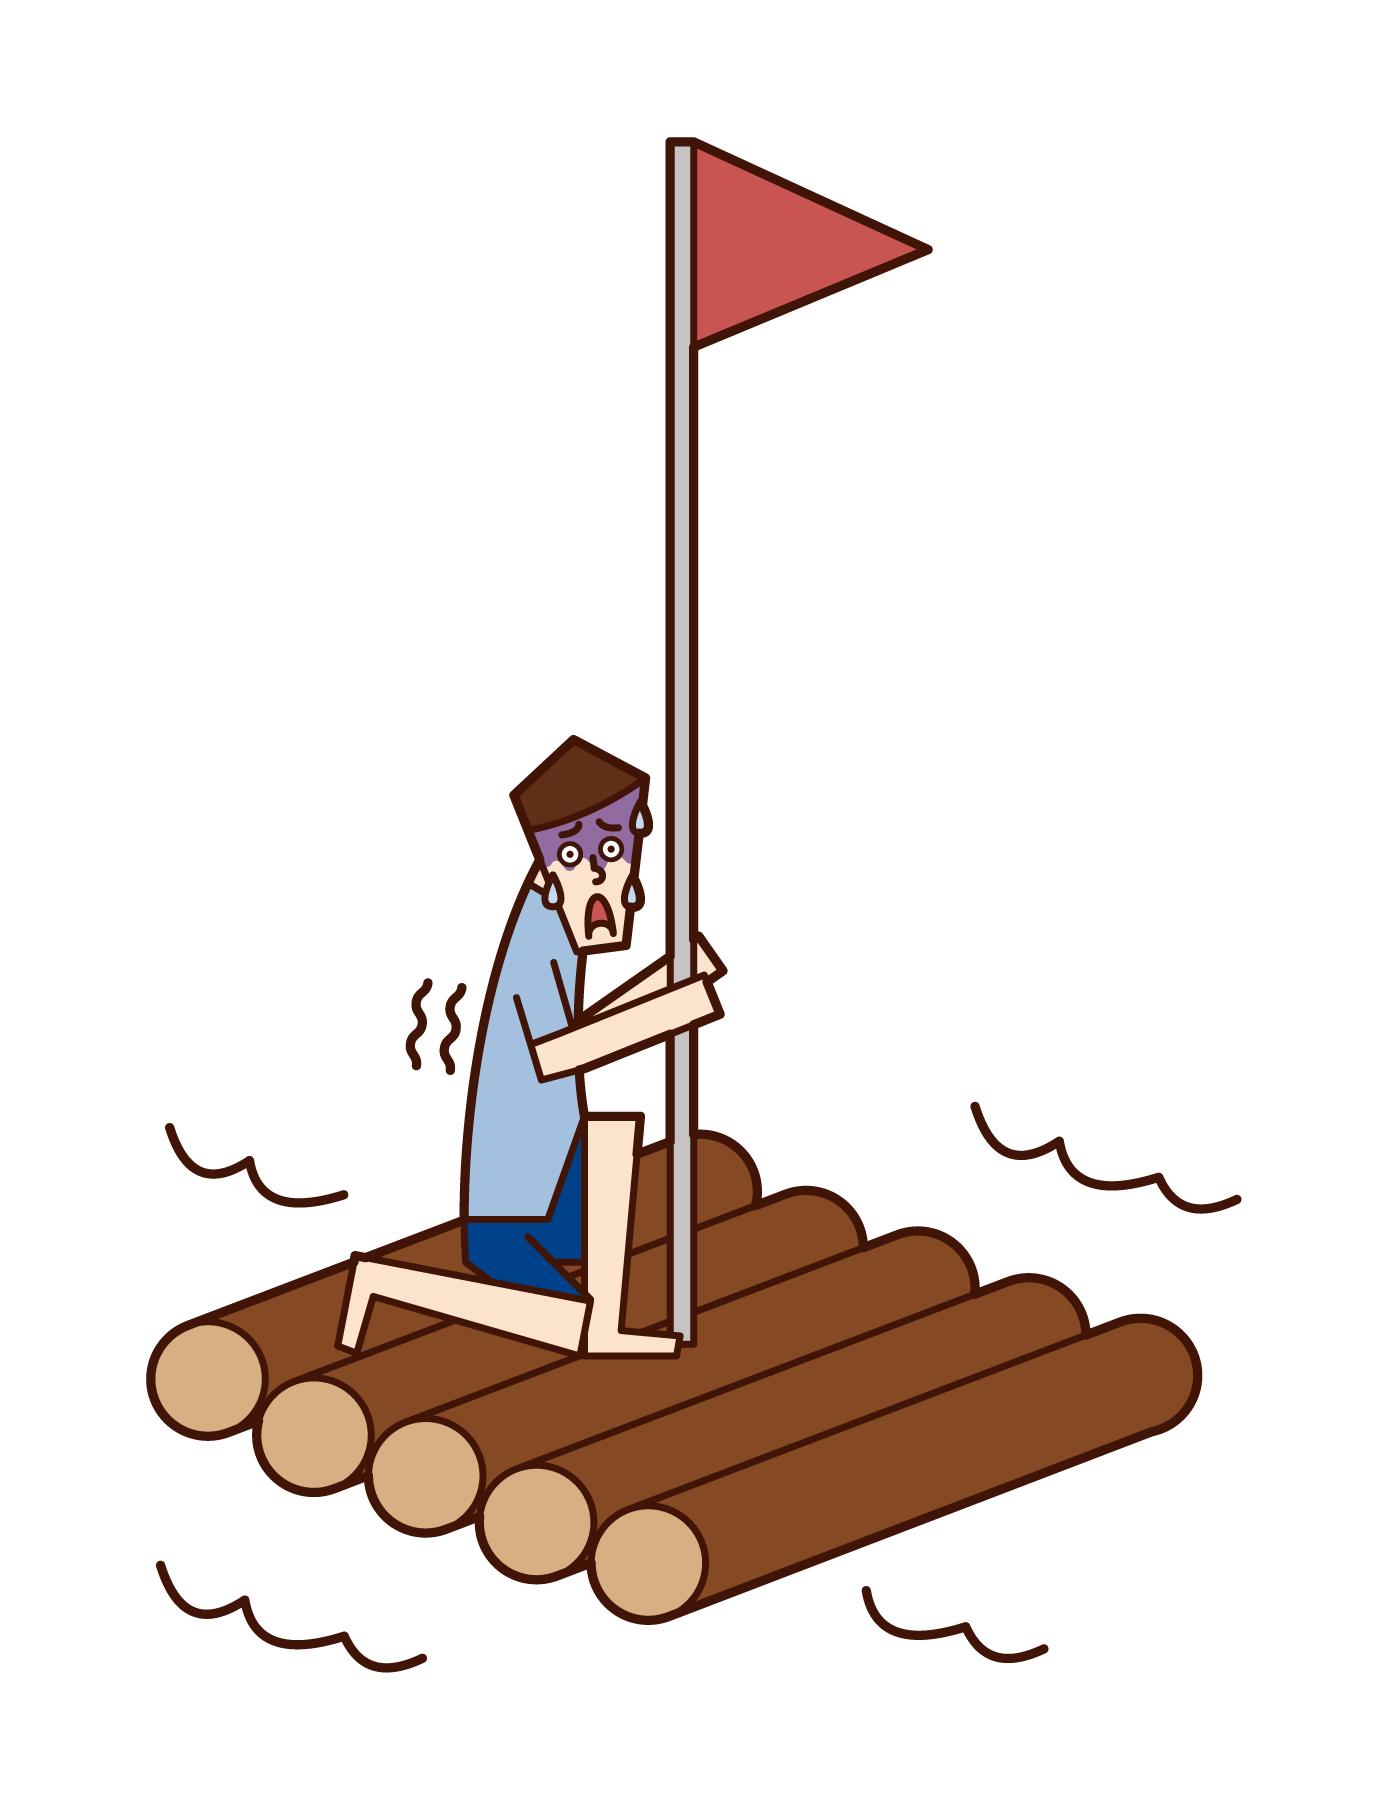 Illustration of a frightened man on a raft